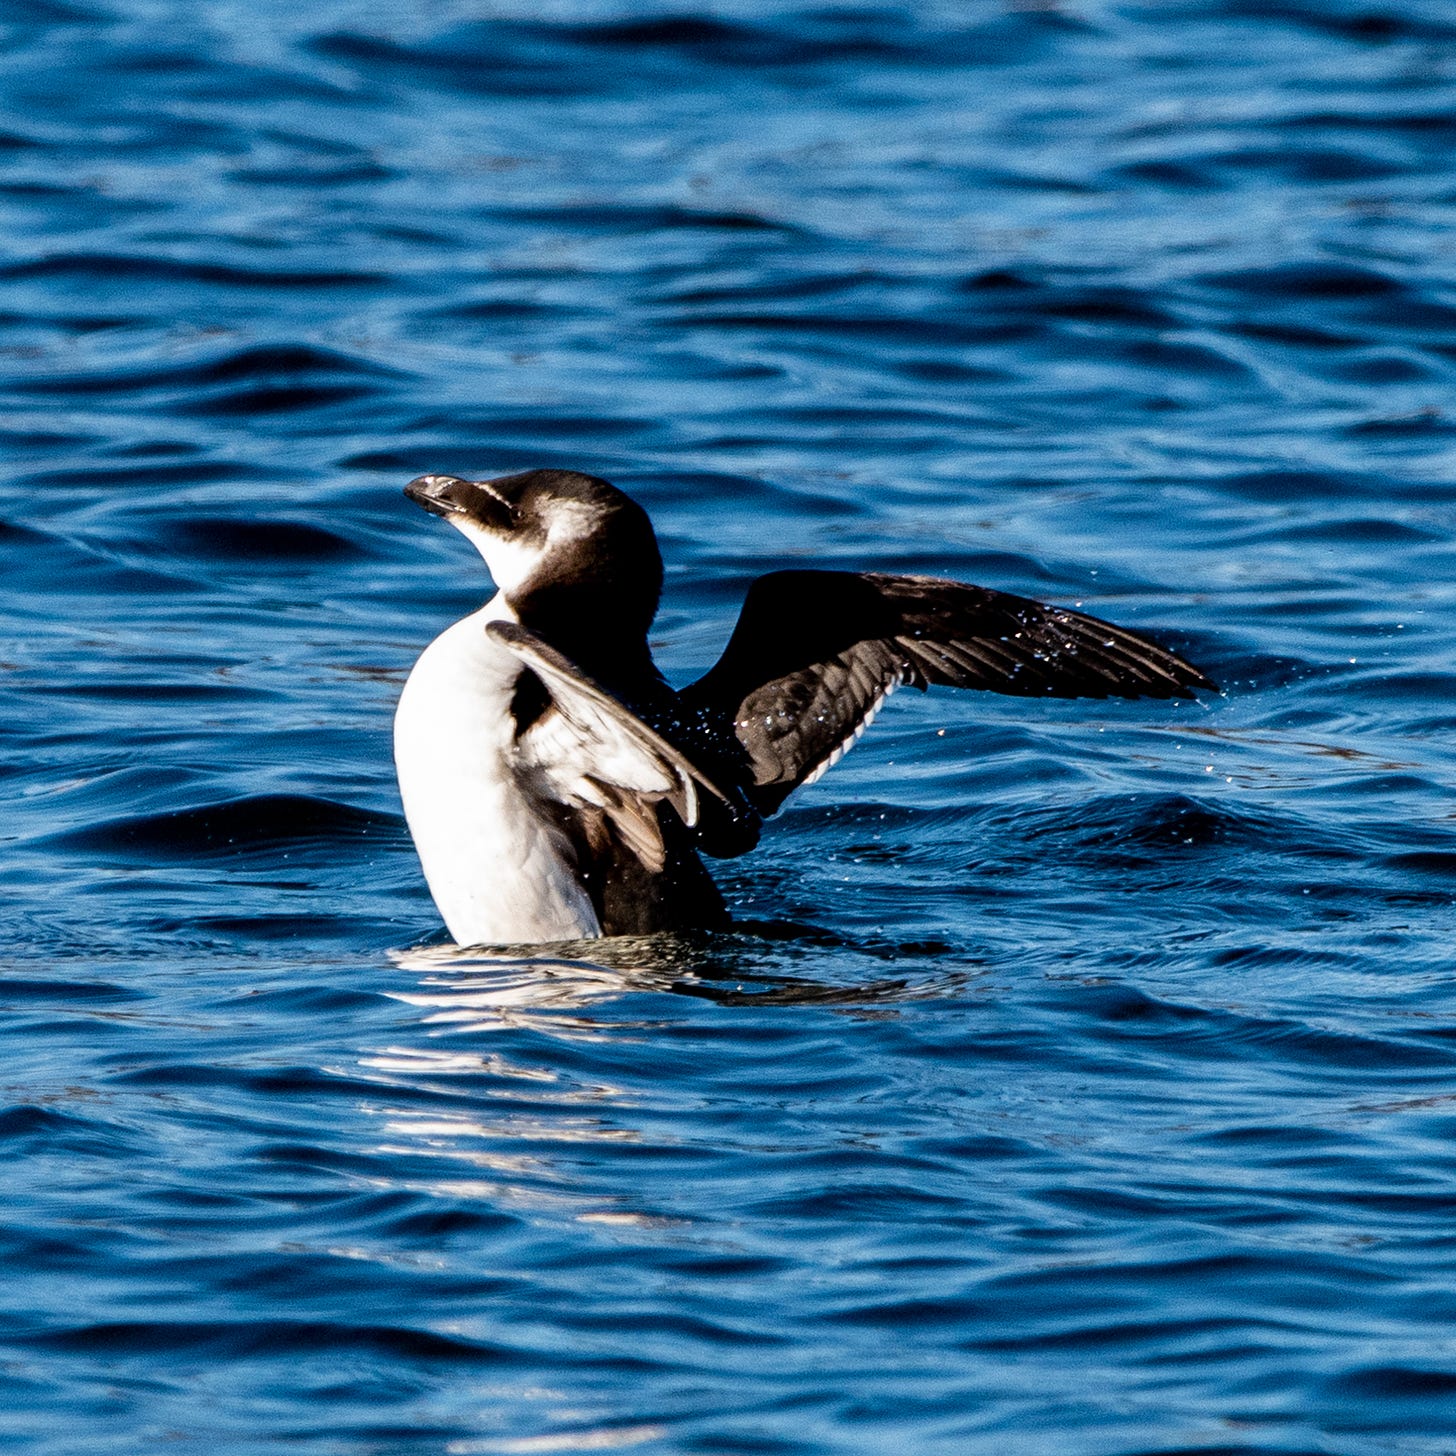 A razorbill rears up in the water, stretching its wings and exposing its belly